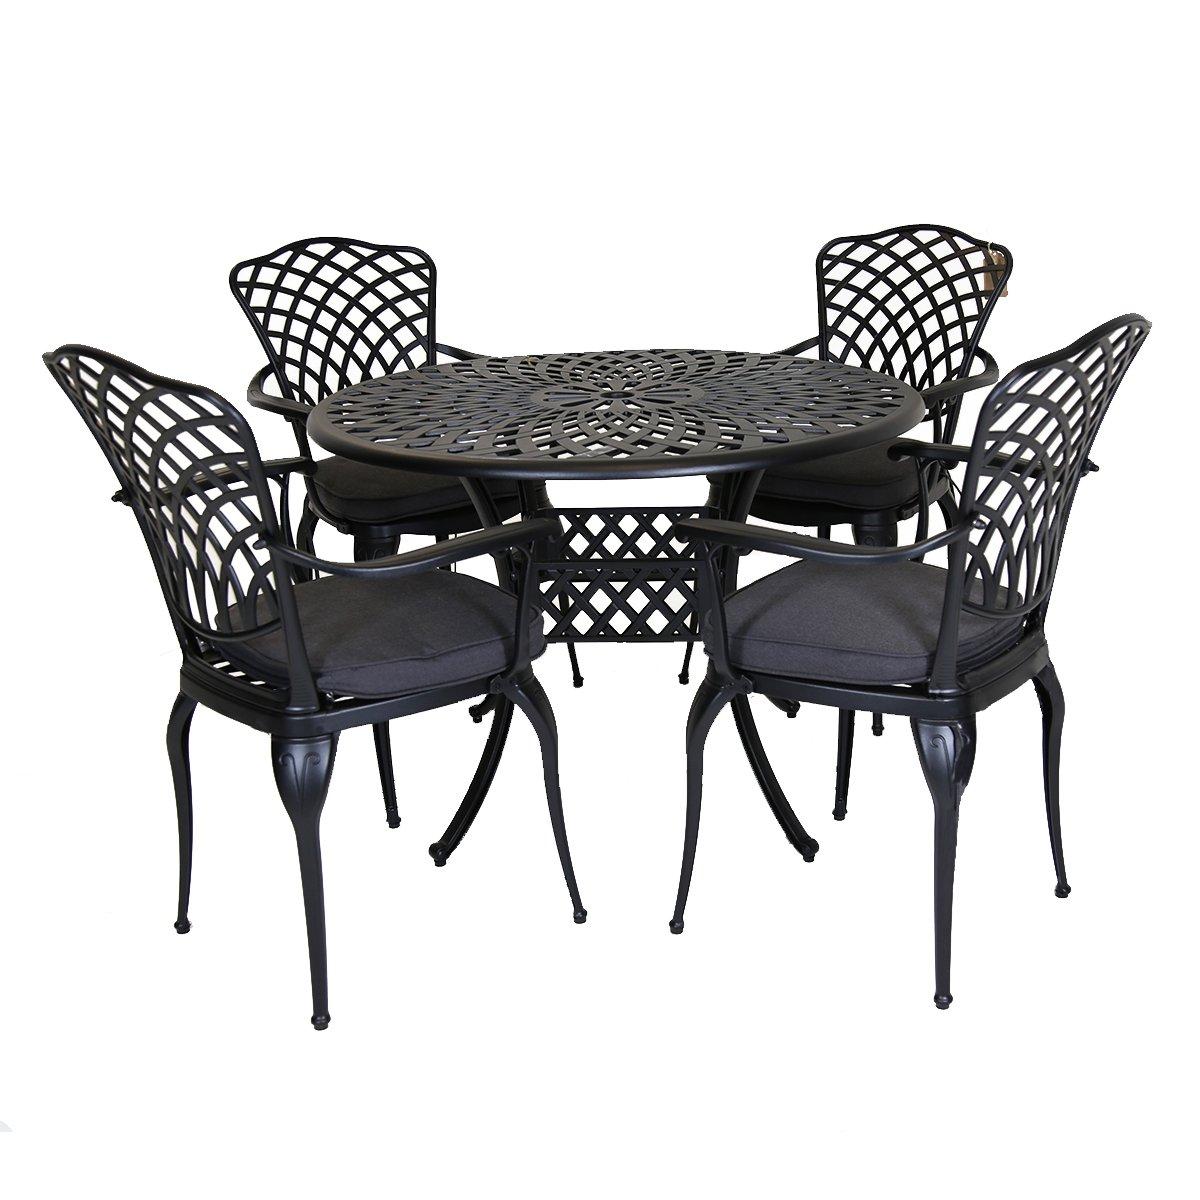 Cast Aluminium Table and 4 Chairs Set Black Outdoor Dining Table